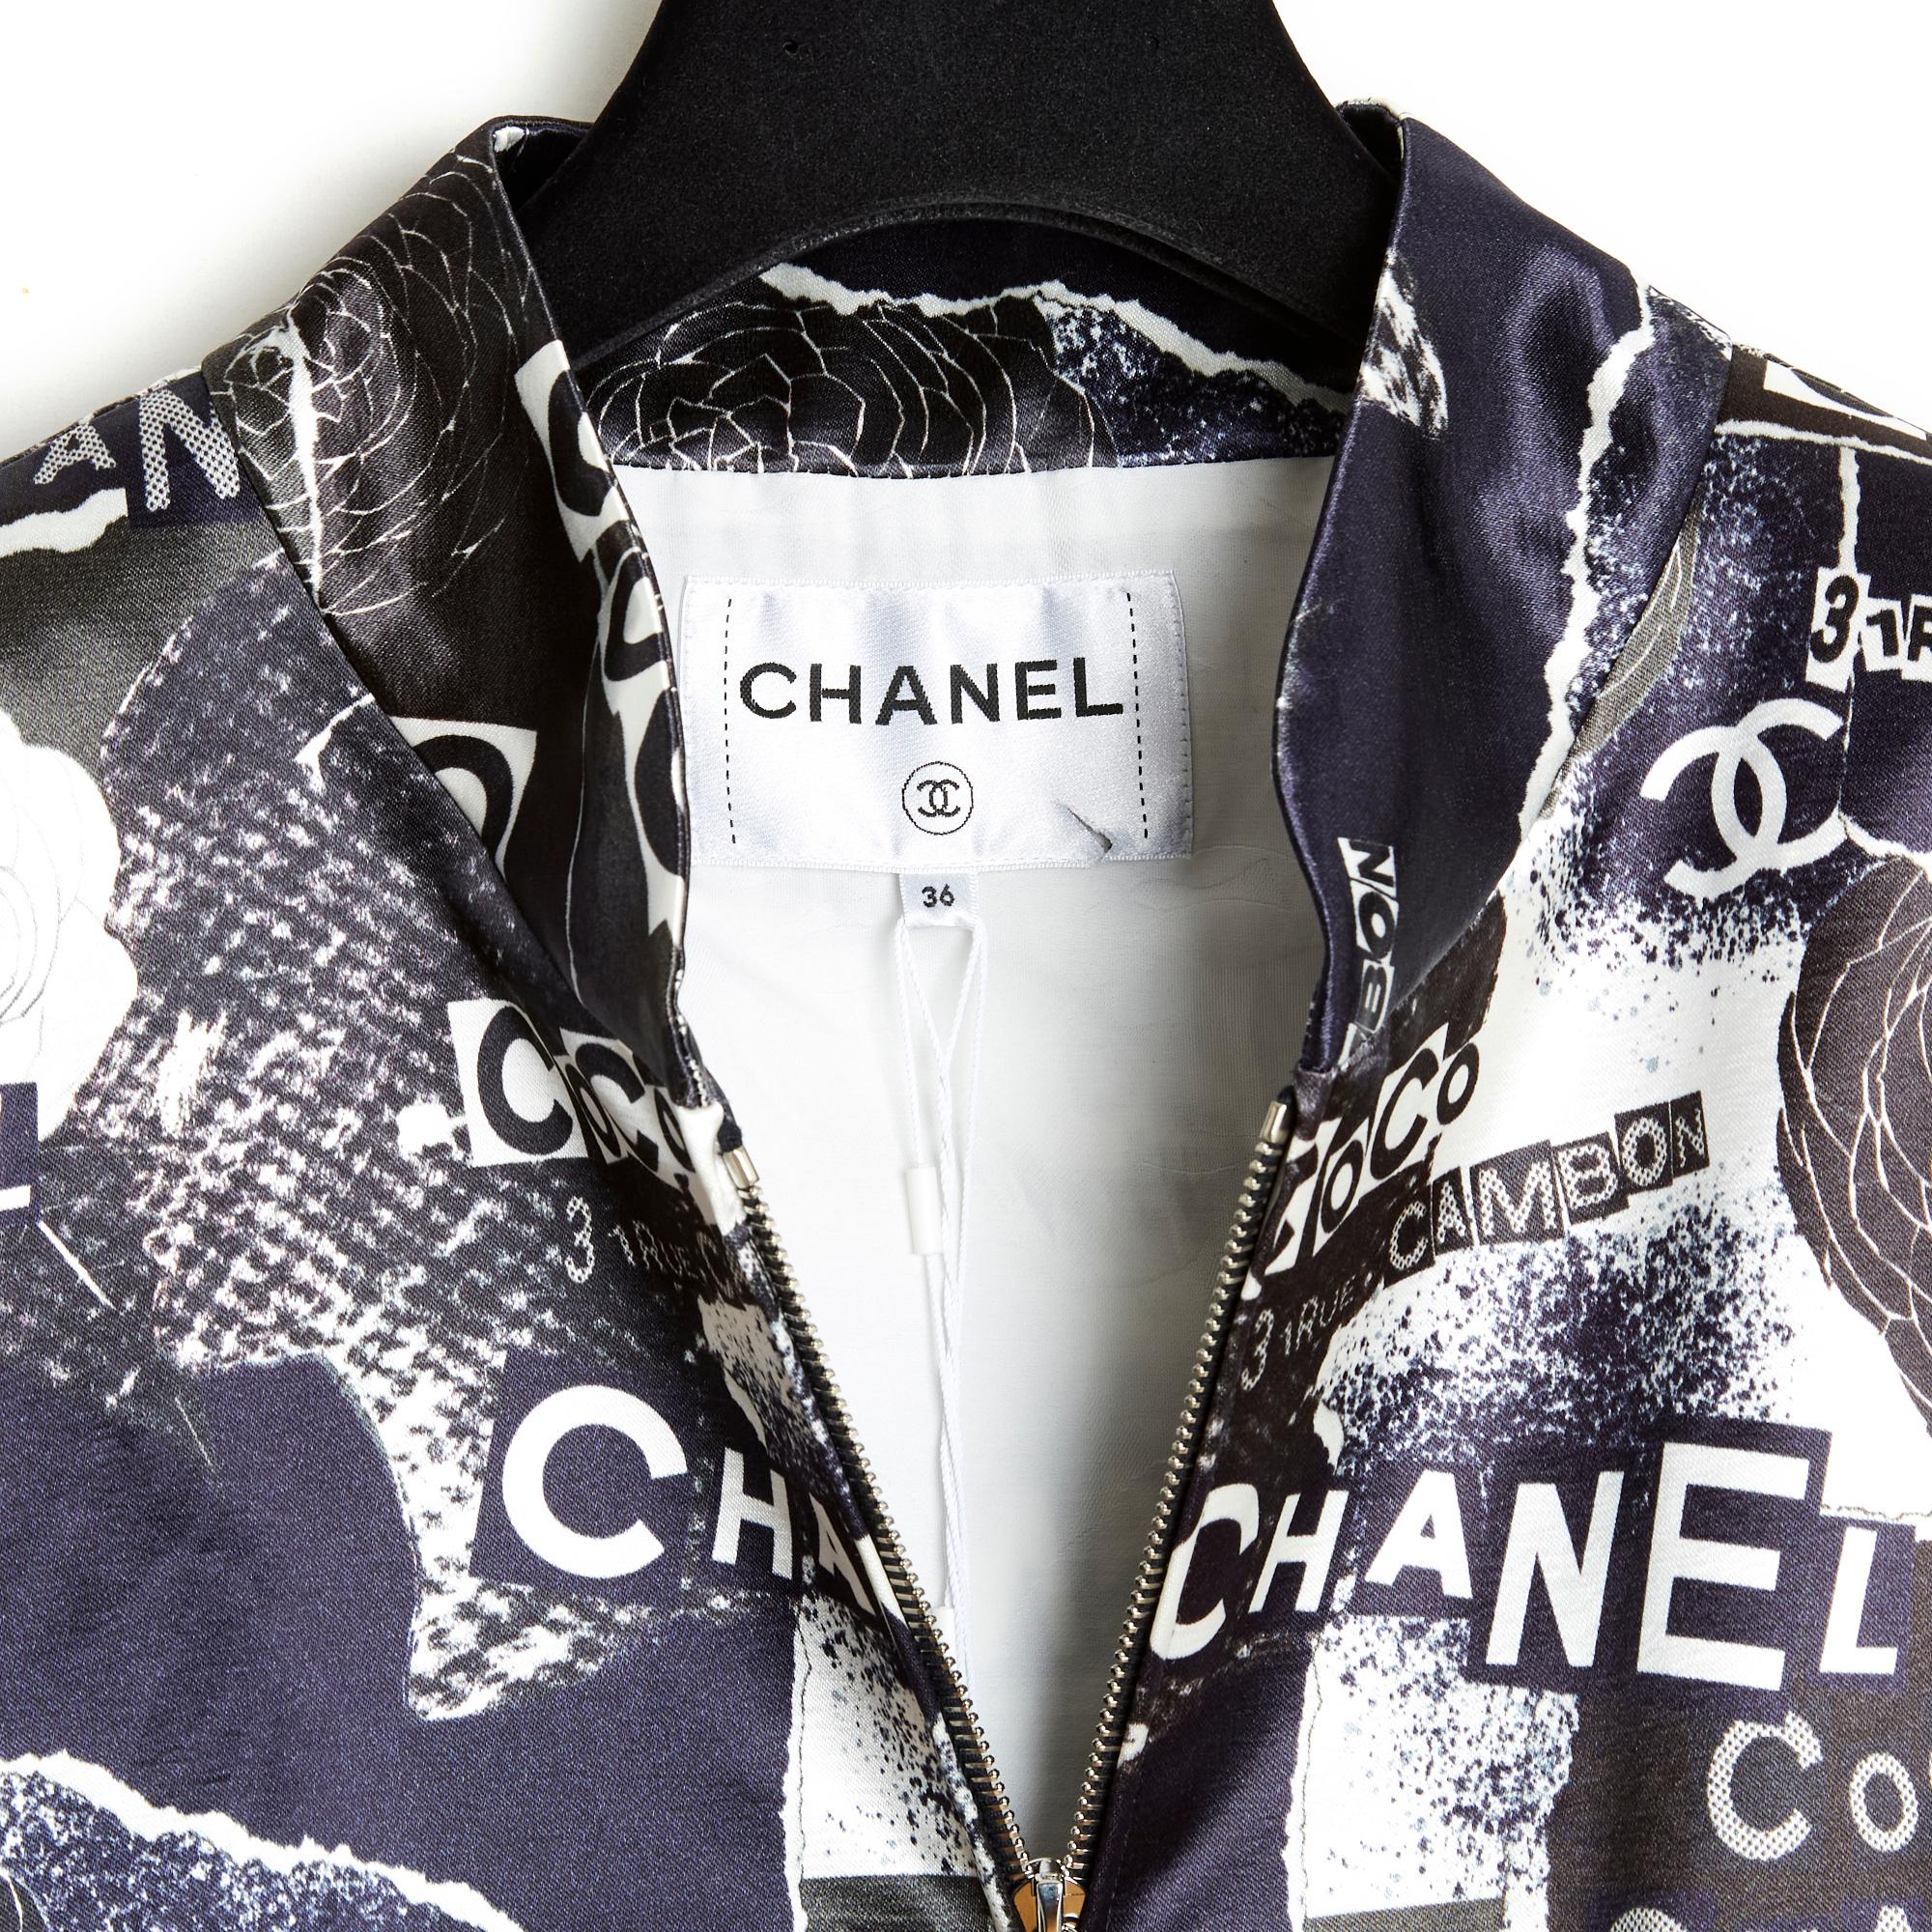 Women's or Men's SS2020 Chanel Jacket Bomber FR36 New with tags